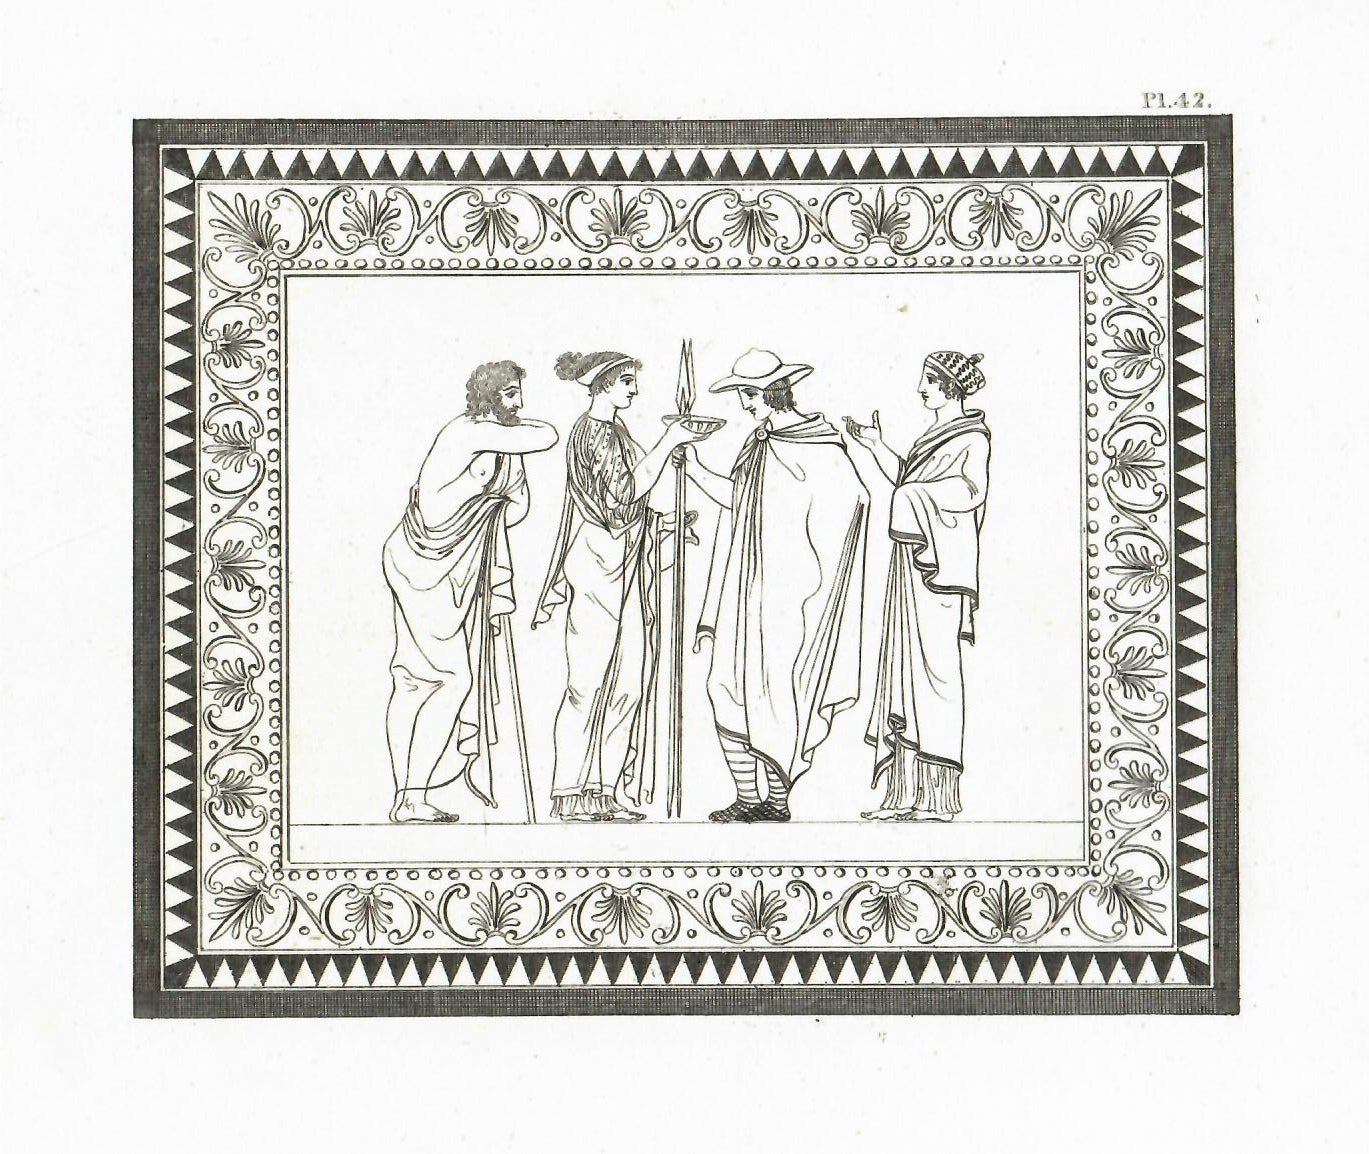 Item #29158 [An Original Engraving From] SIR WILLIAM HAMILTON'S OUTLINES FROM THE FIGURES AND COMPOSITIONS UPON THE Greek, Roman, AND ETRUSCAN VASES. Antiquities, Art Prints, Sir William Hamilton.